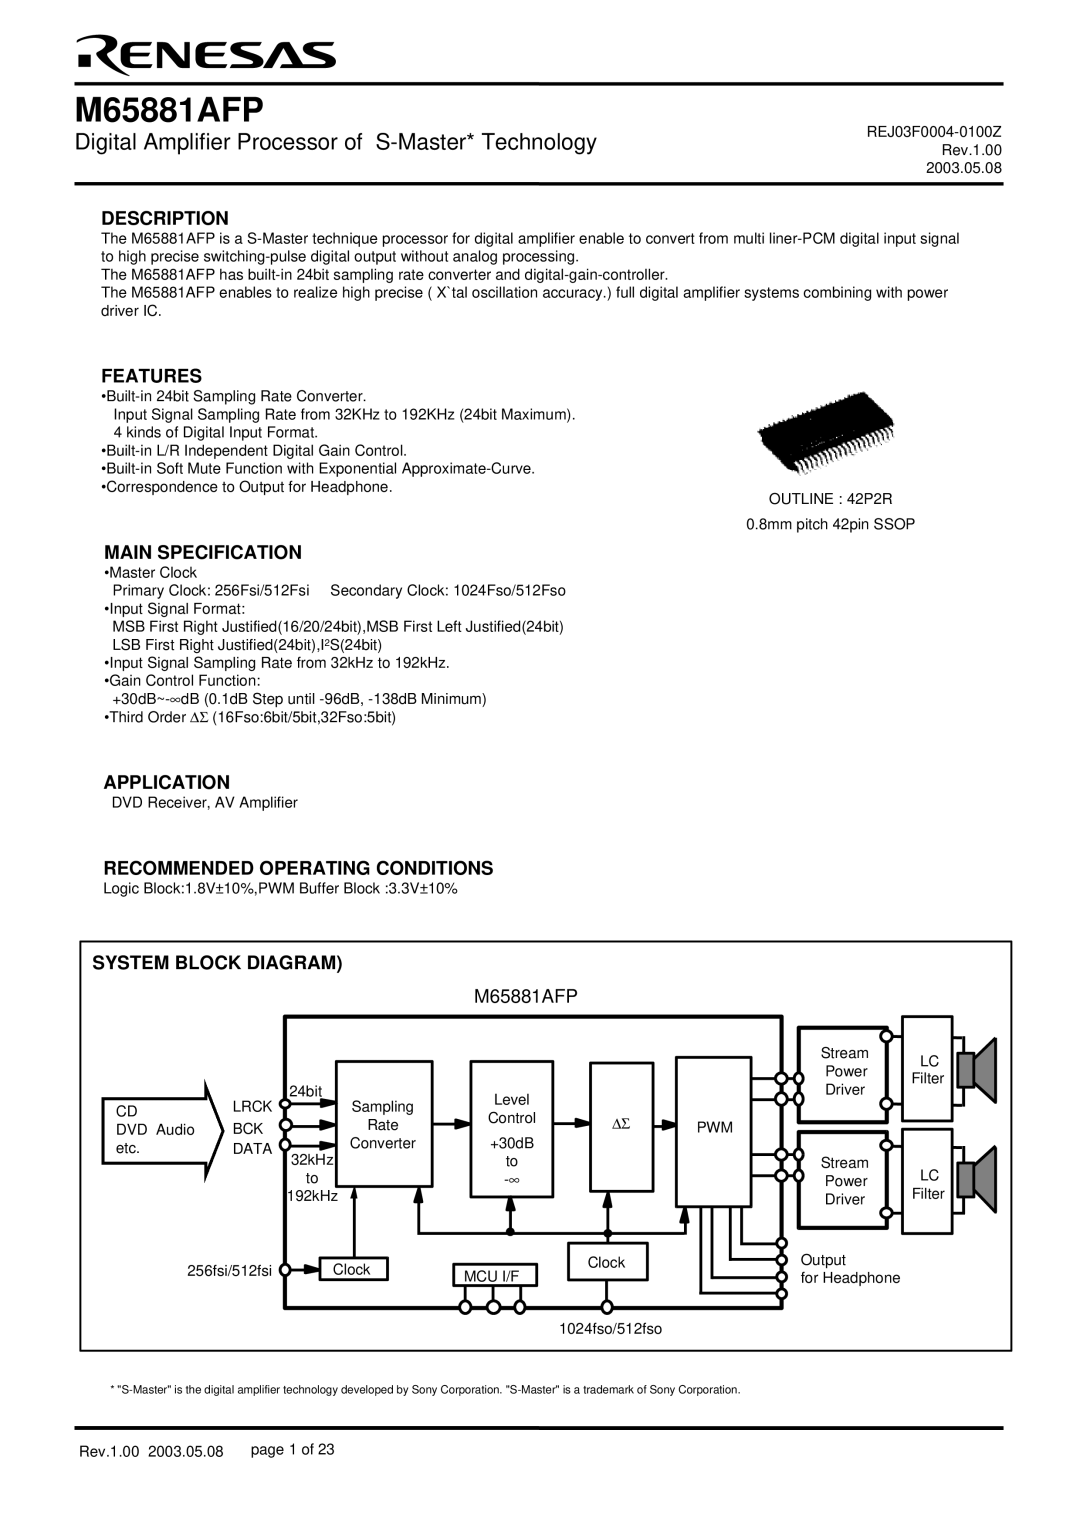 Renesas M65881AFP manual Description, Features, Main Specification, Application, Recommended Operating Conditions 